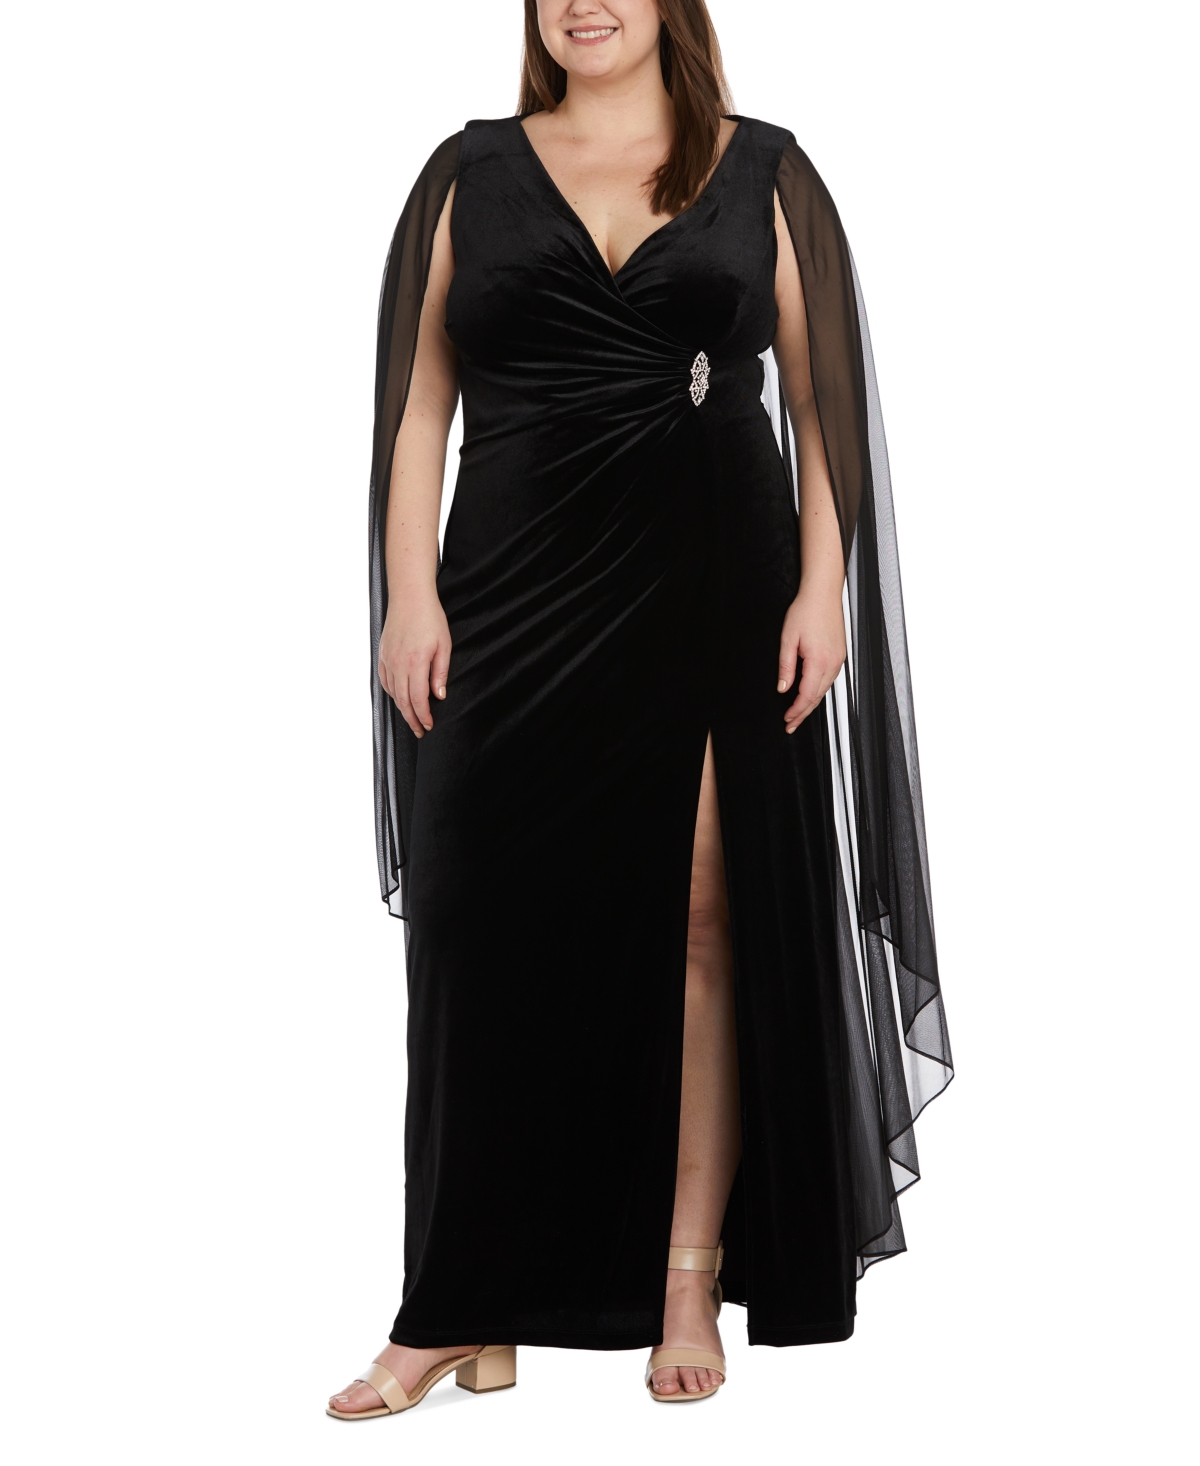 1950s History of Prom, Party, Evening and Formal Dresses R  M Richards Plus Size Draped-Shoulder Side-Ruched Gown - Black $129.00 AT vintagedancer.com